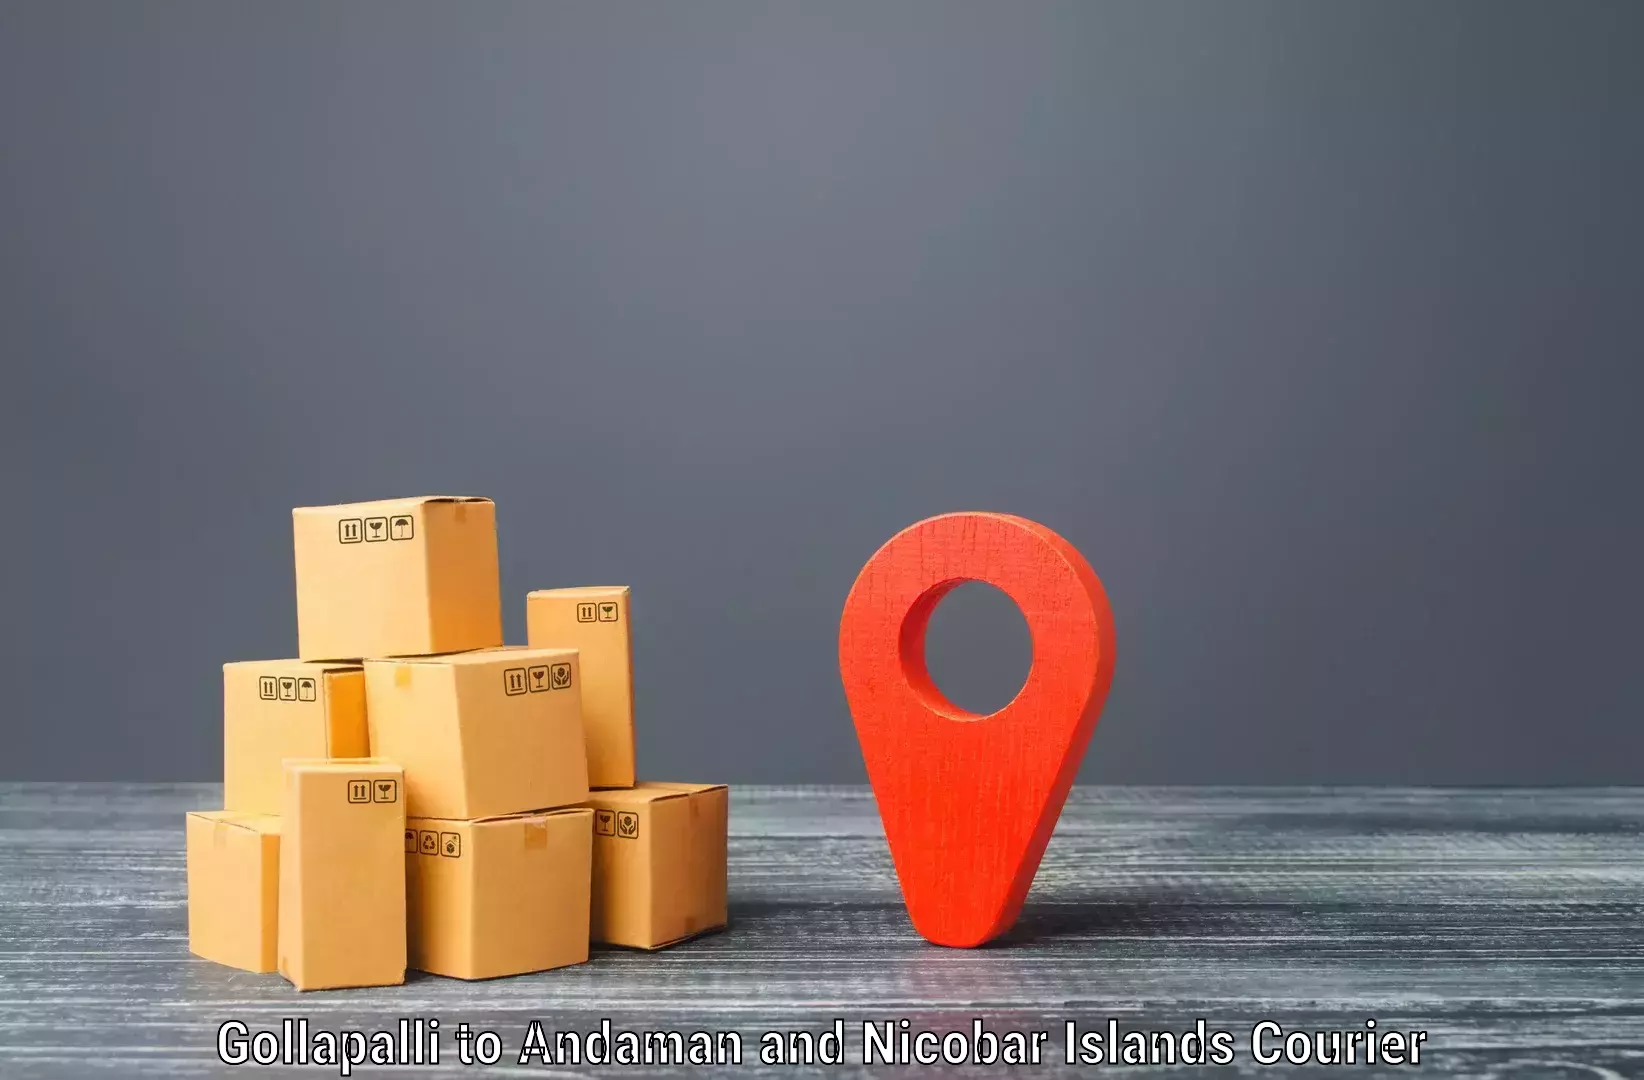 User-friendly courier app Gollapalli to Port Blair